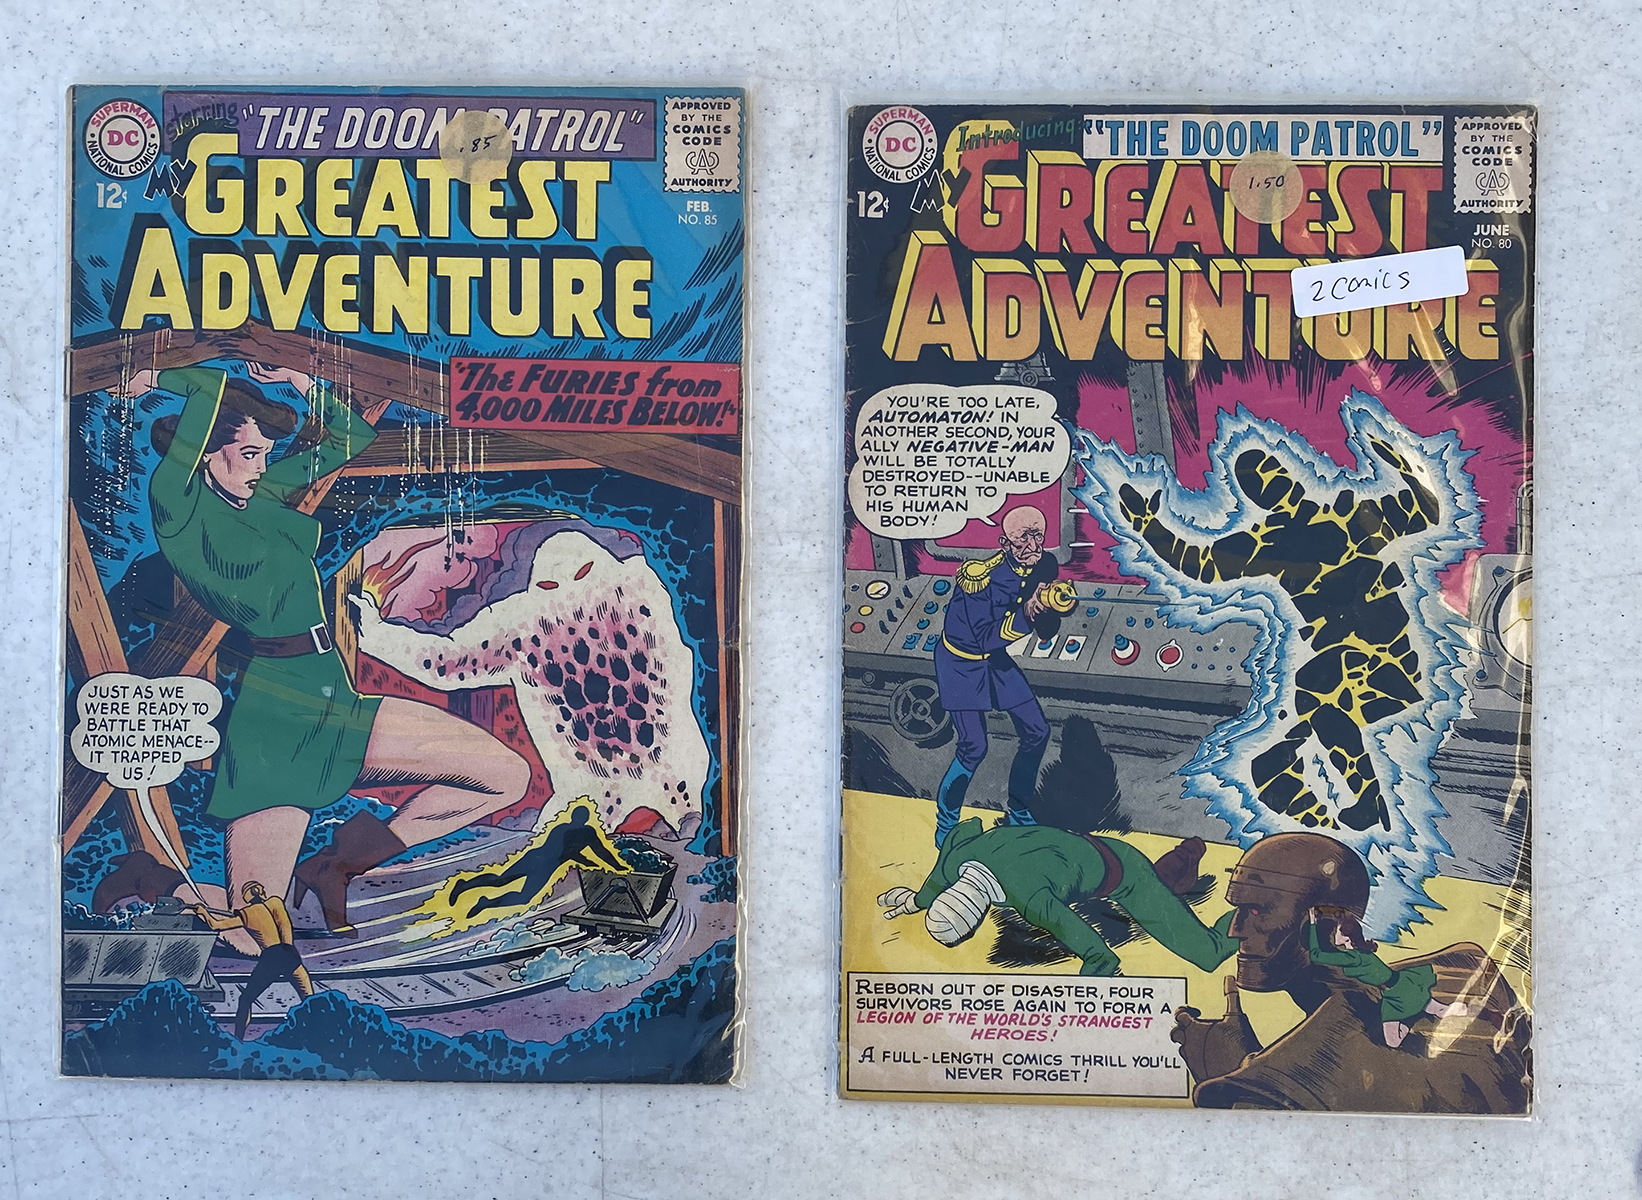 SILVER AGE MY GREATEST ADVENTURE